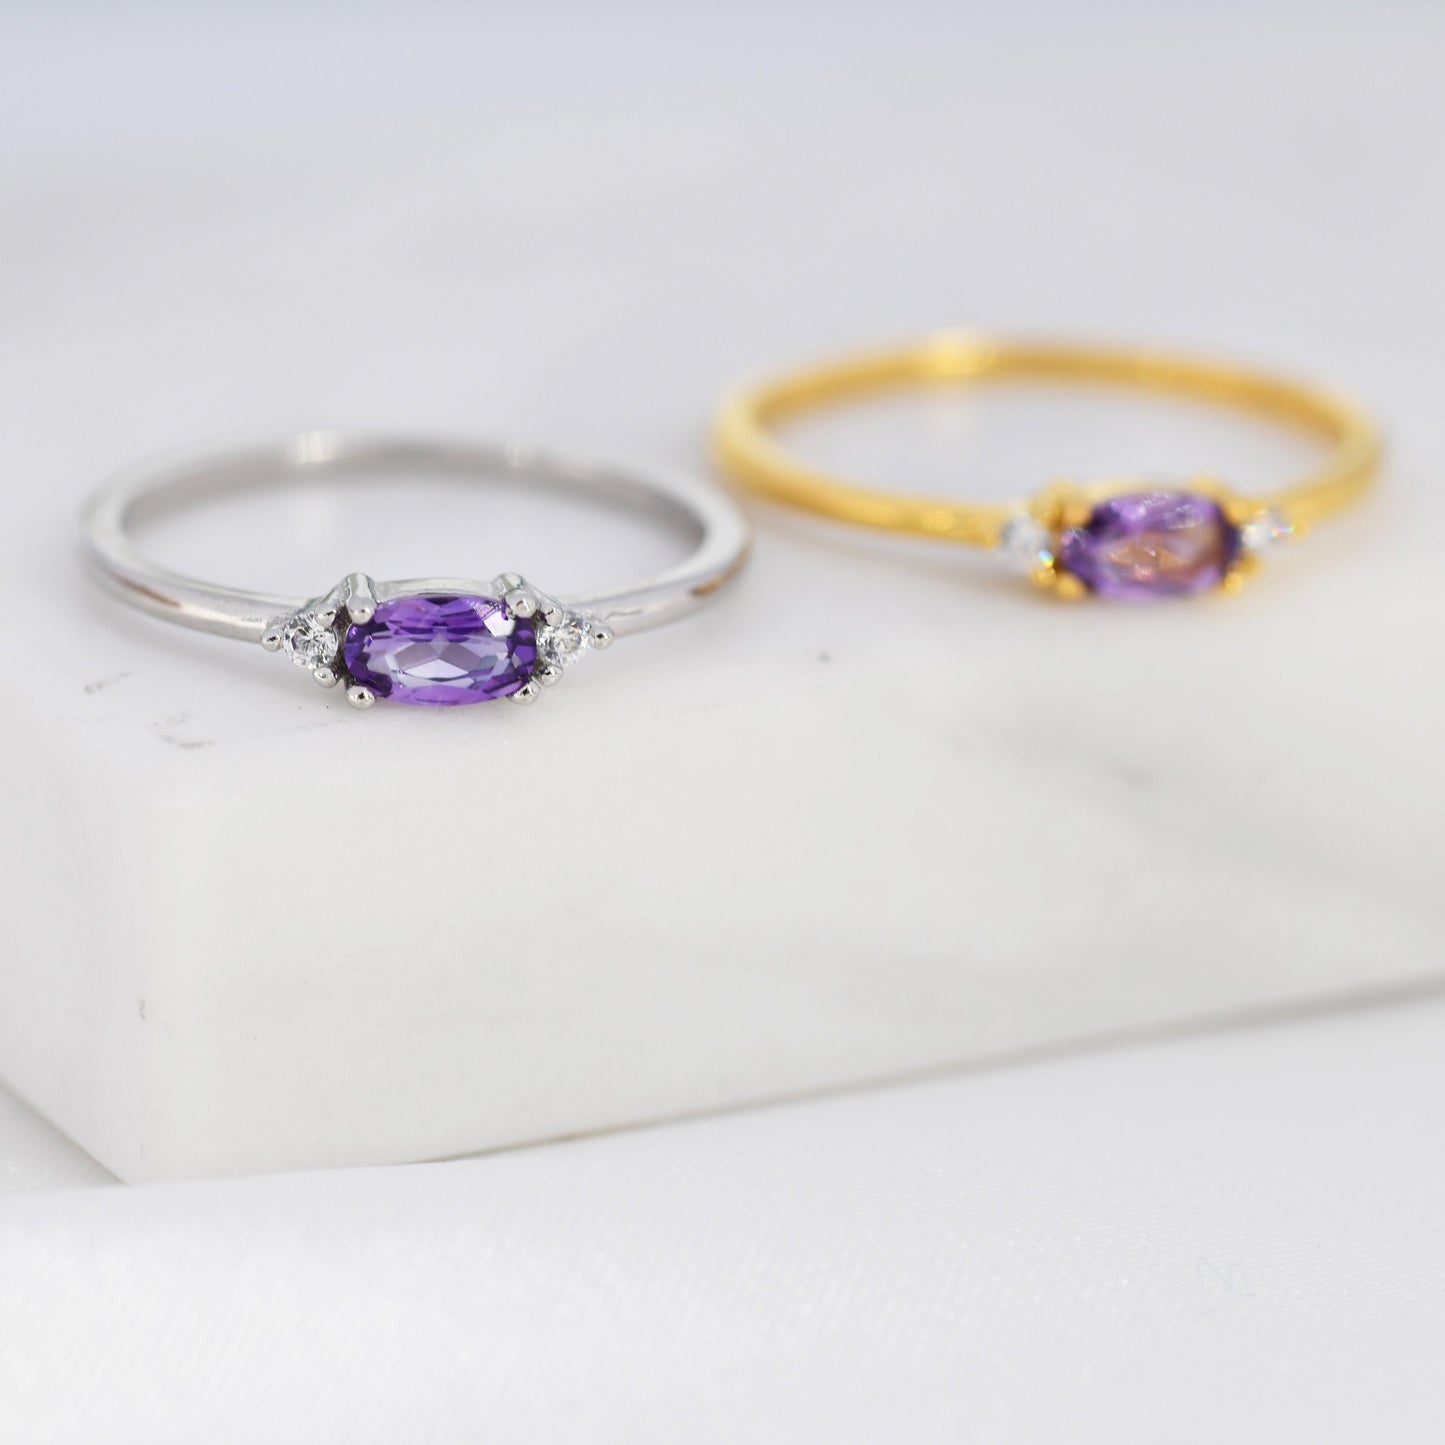 Natural Amethyst Ring in Sterling Silver, Silver or Gold, Natural purple Amethyst Ring, Dainty Amethyst Ring, US 5-8